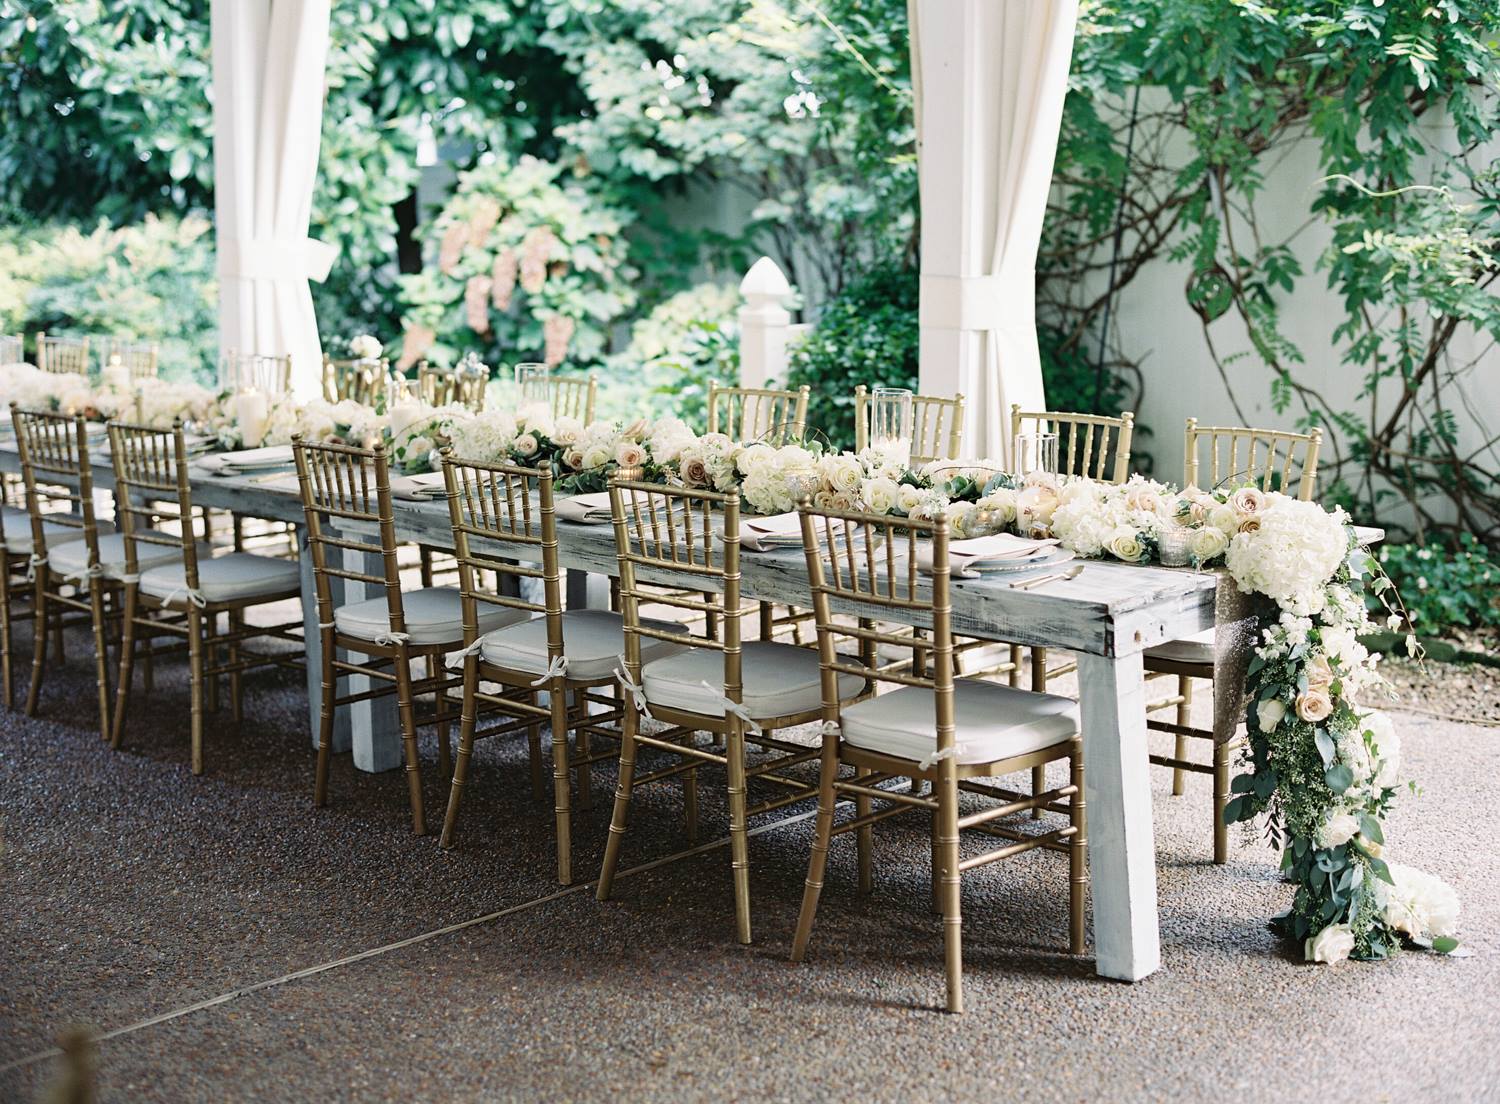 Outdoor wedding reception table with floral arrangements from Enchanted Florist by Nathan Westerfield | The Pink Bride® www.thepinkbride.com